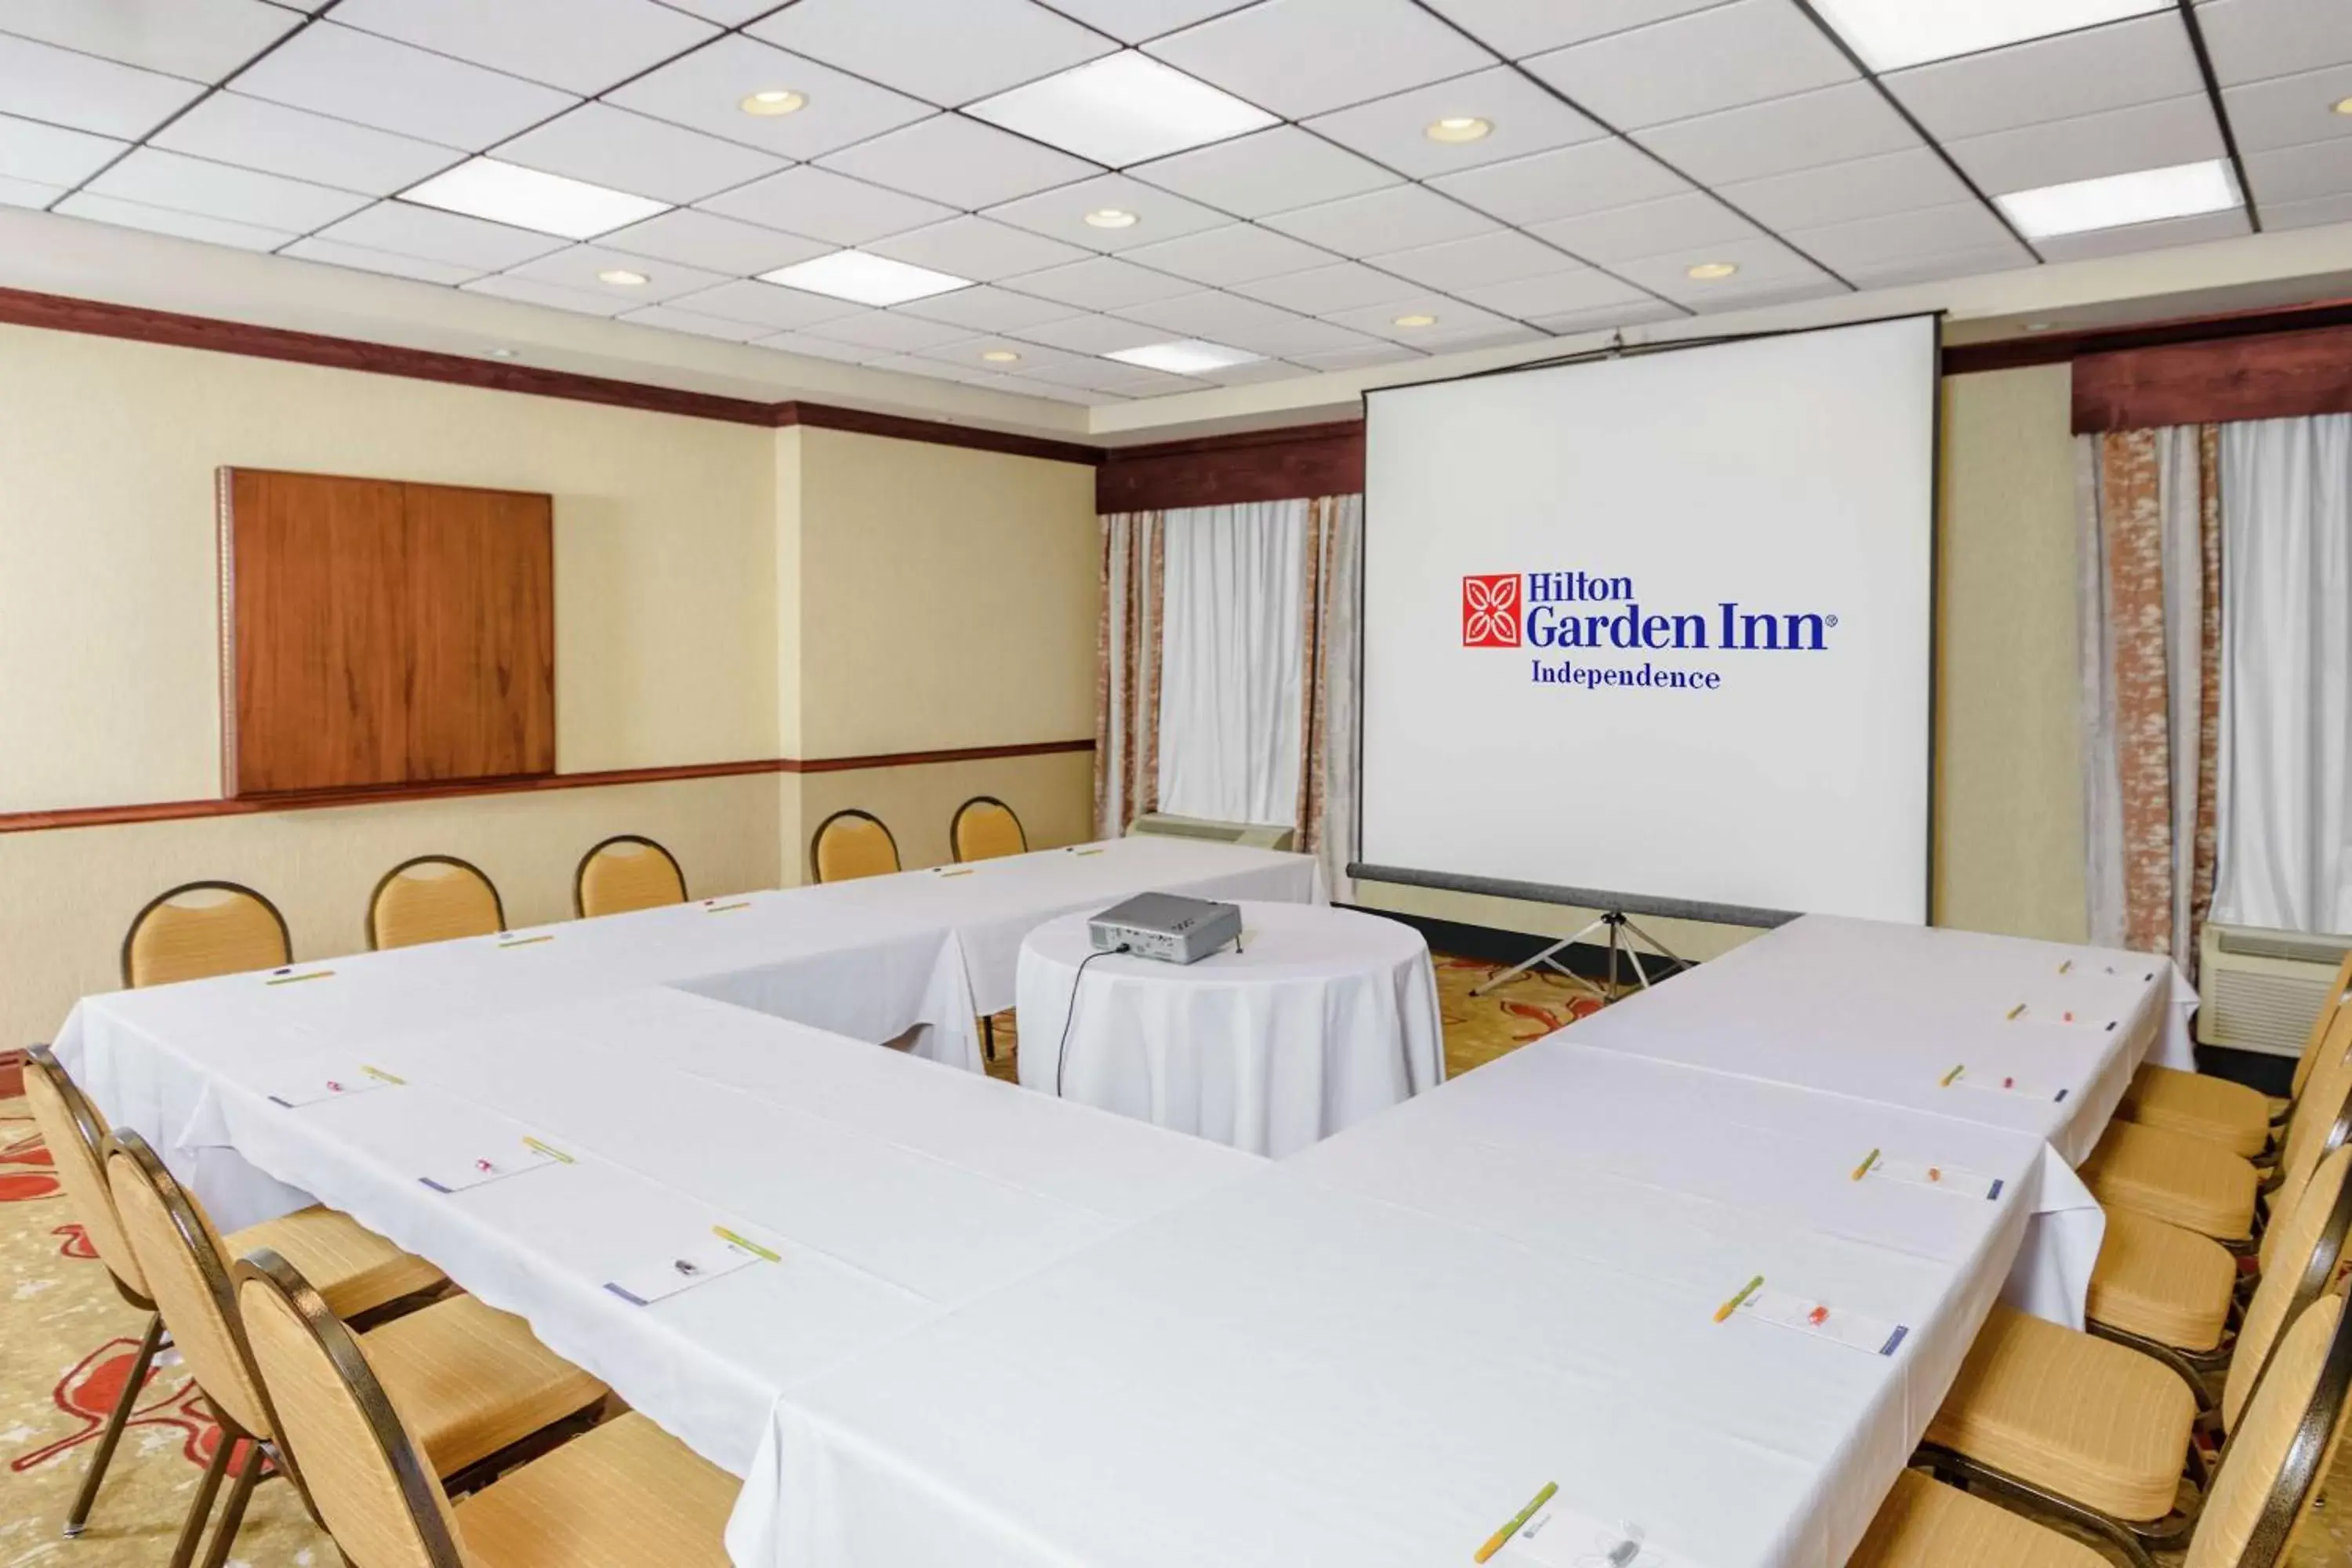 Meeting/conference room in Hilton Garden Inn Independence